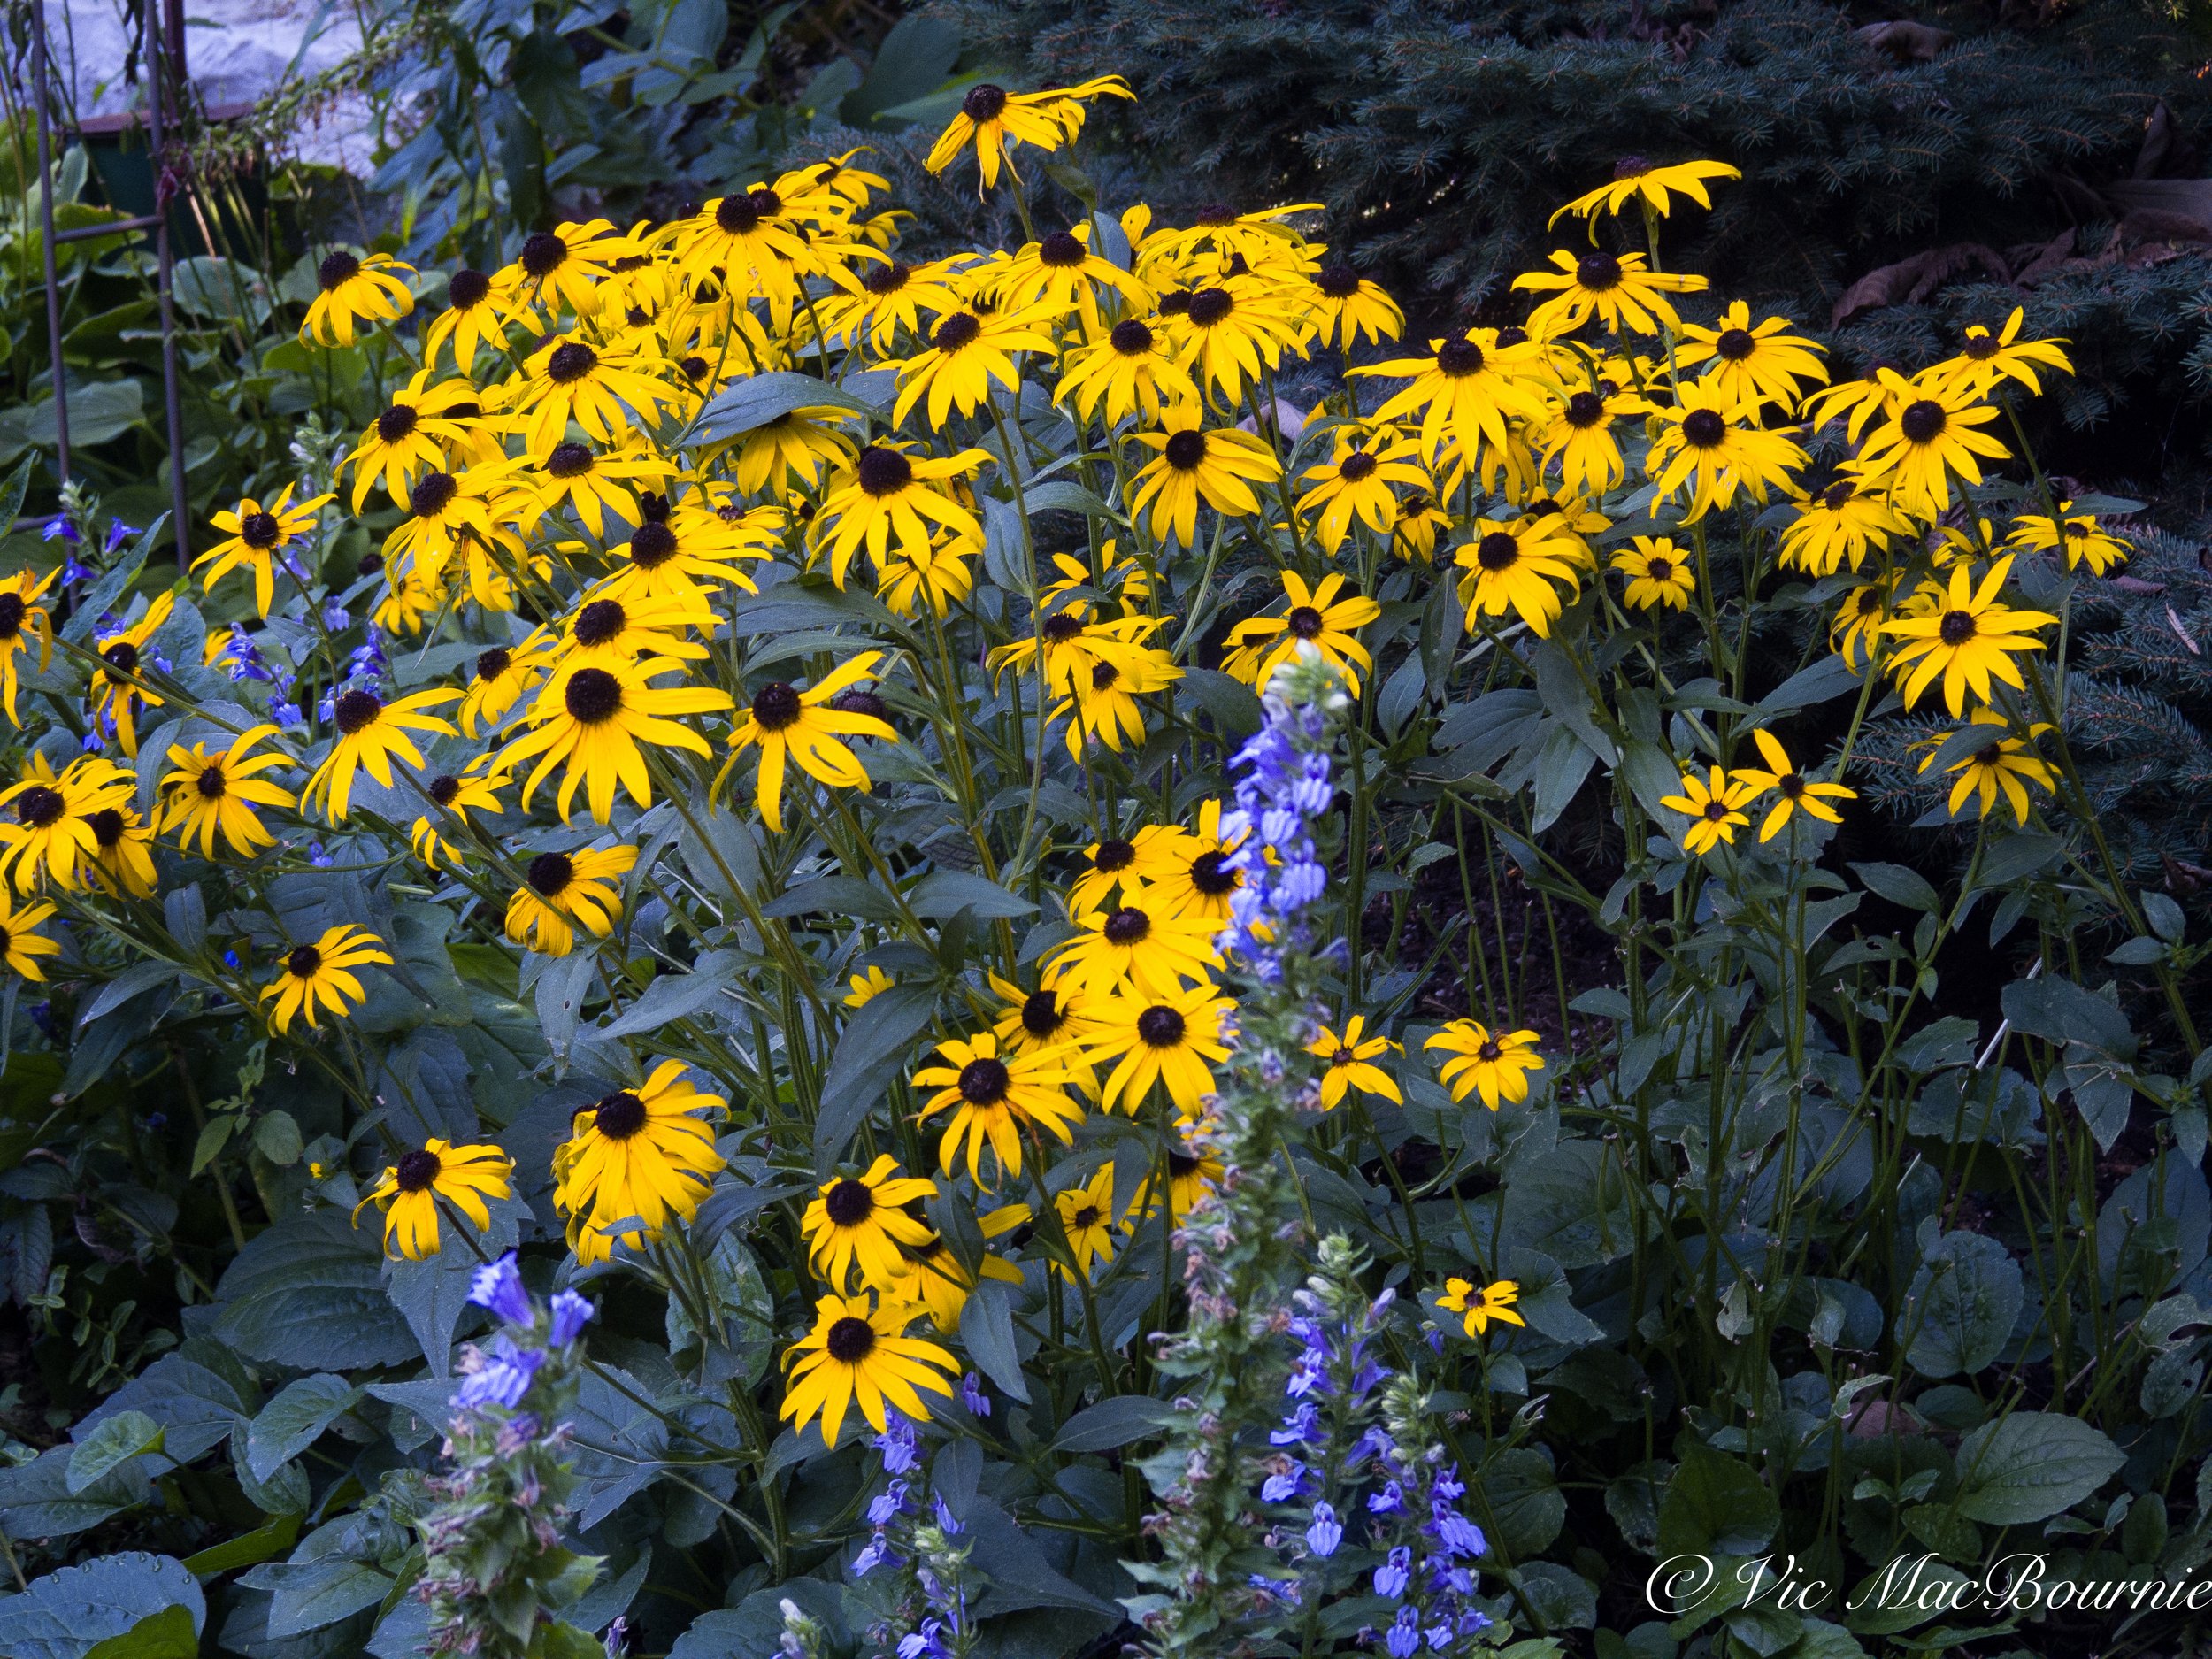 A lovely combination of Black Eyed Susans and native blue lobelia.